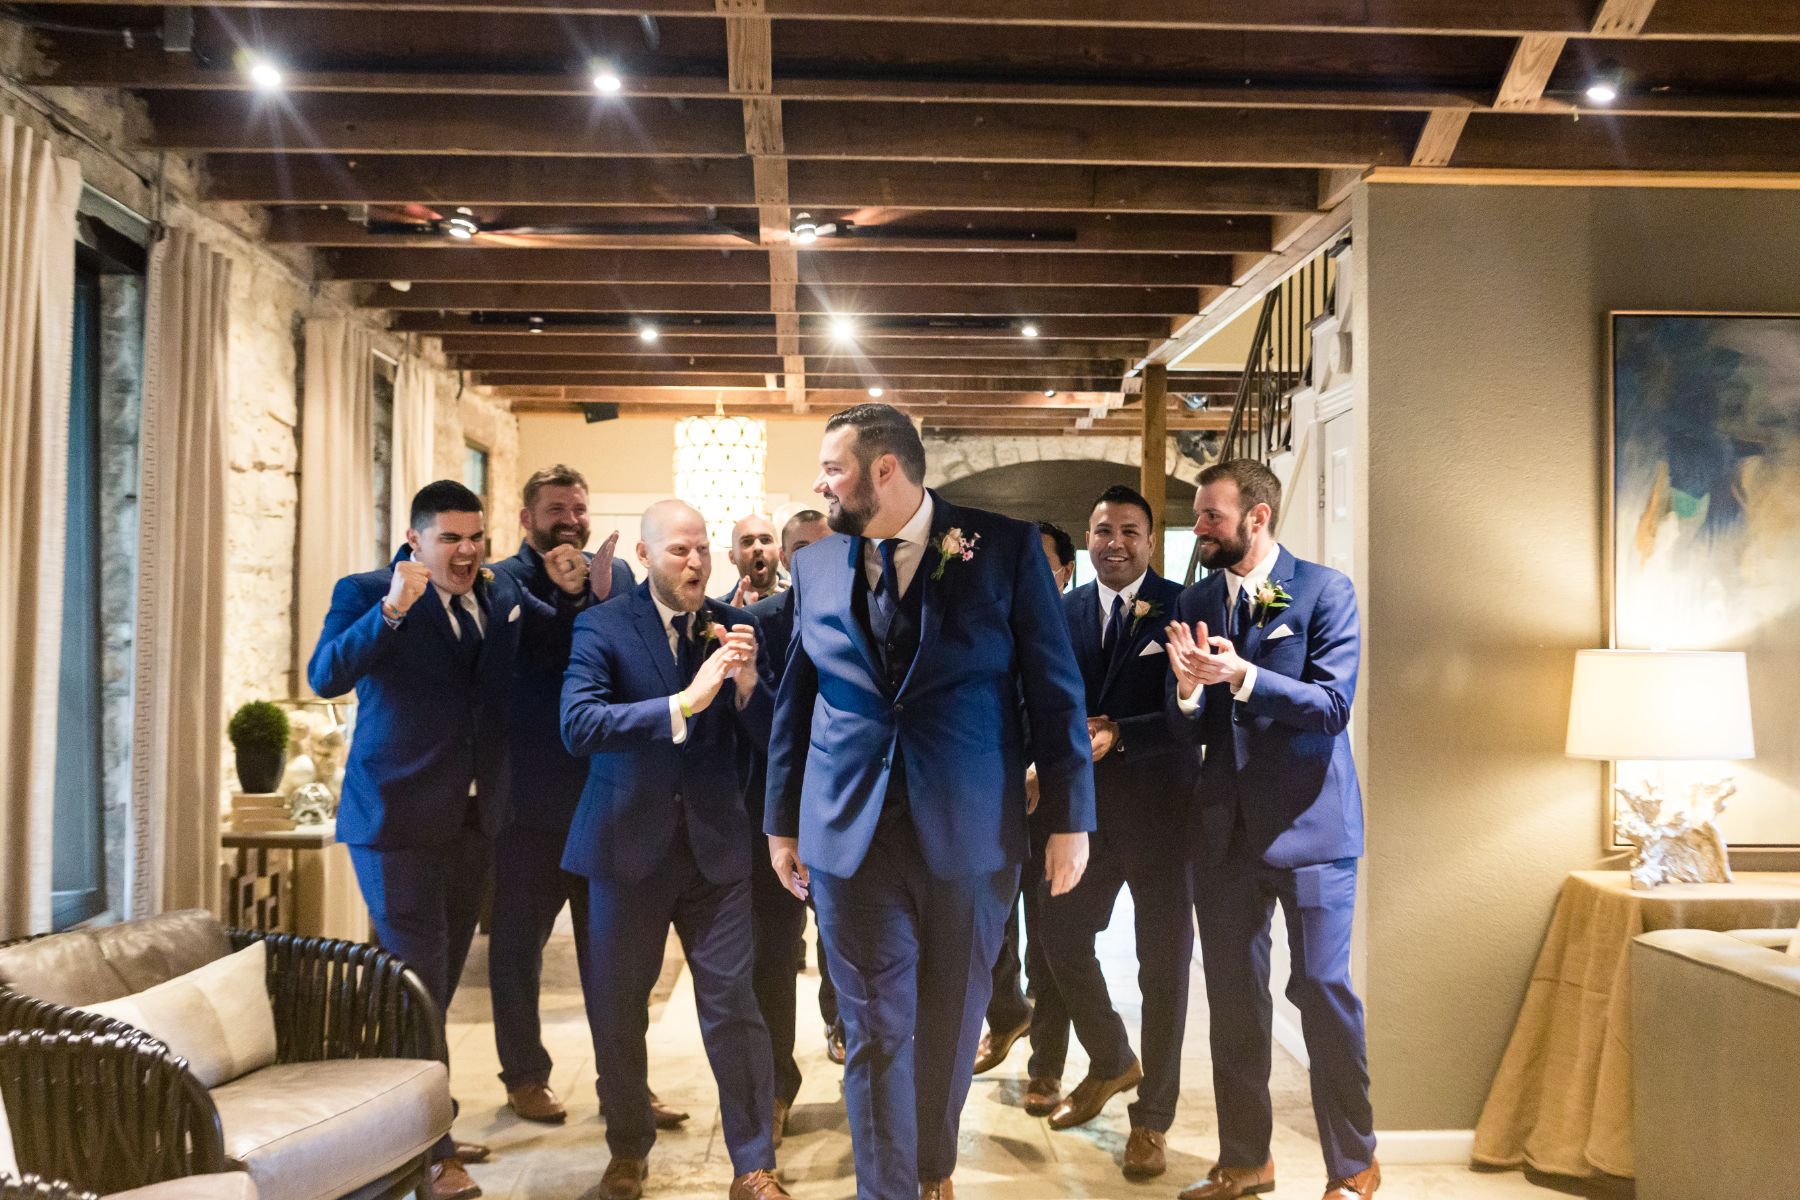 Groom walks with groomsmen as they cheer him on in a rustic, elegant room at Stonehouse Willa with exposed wood beams and limestone walls.